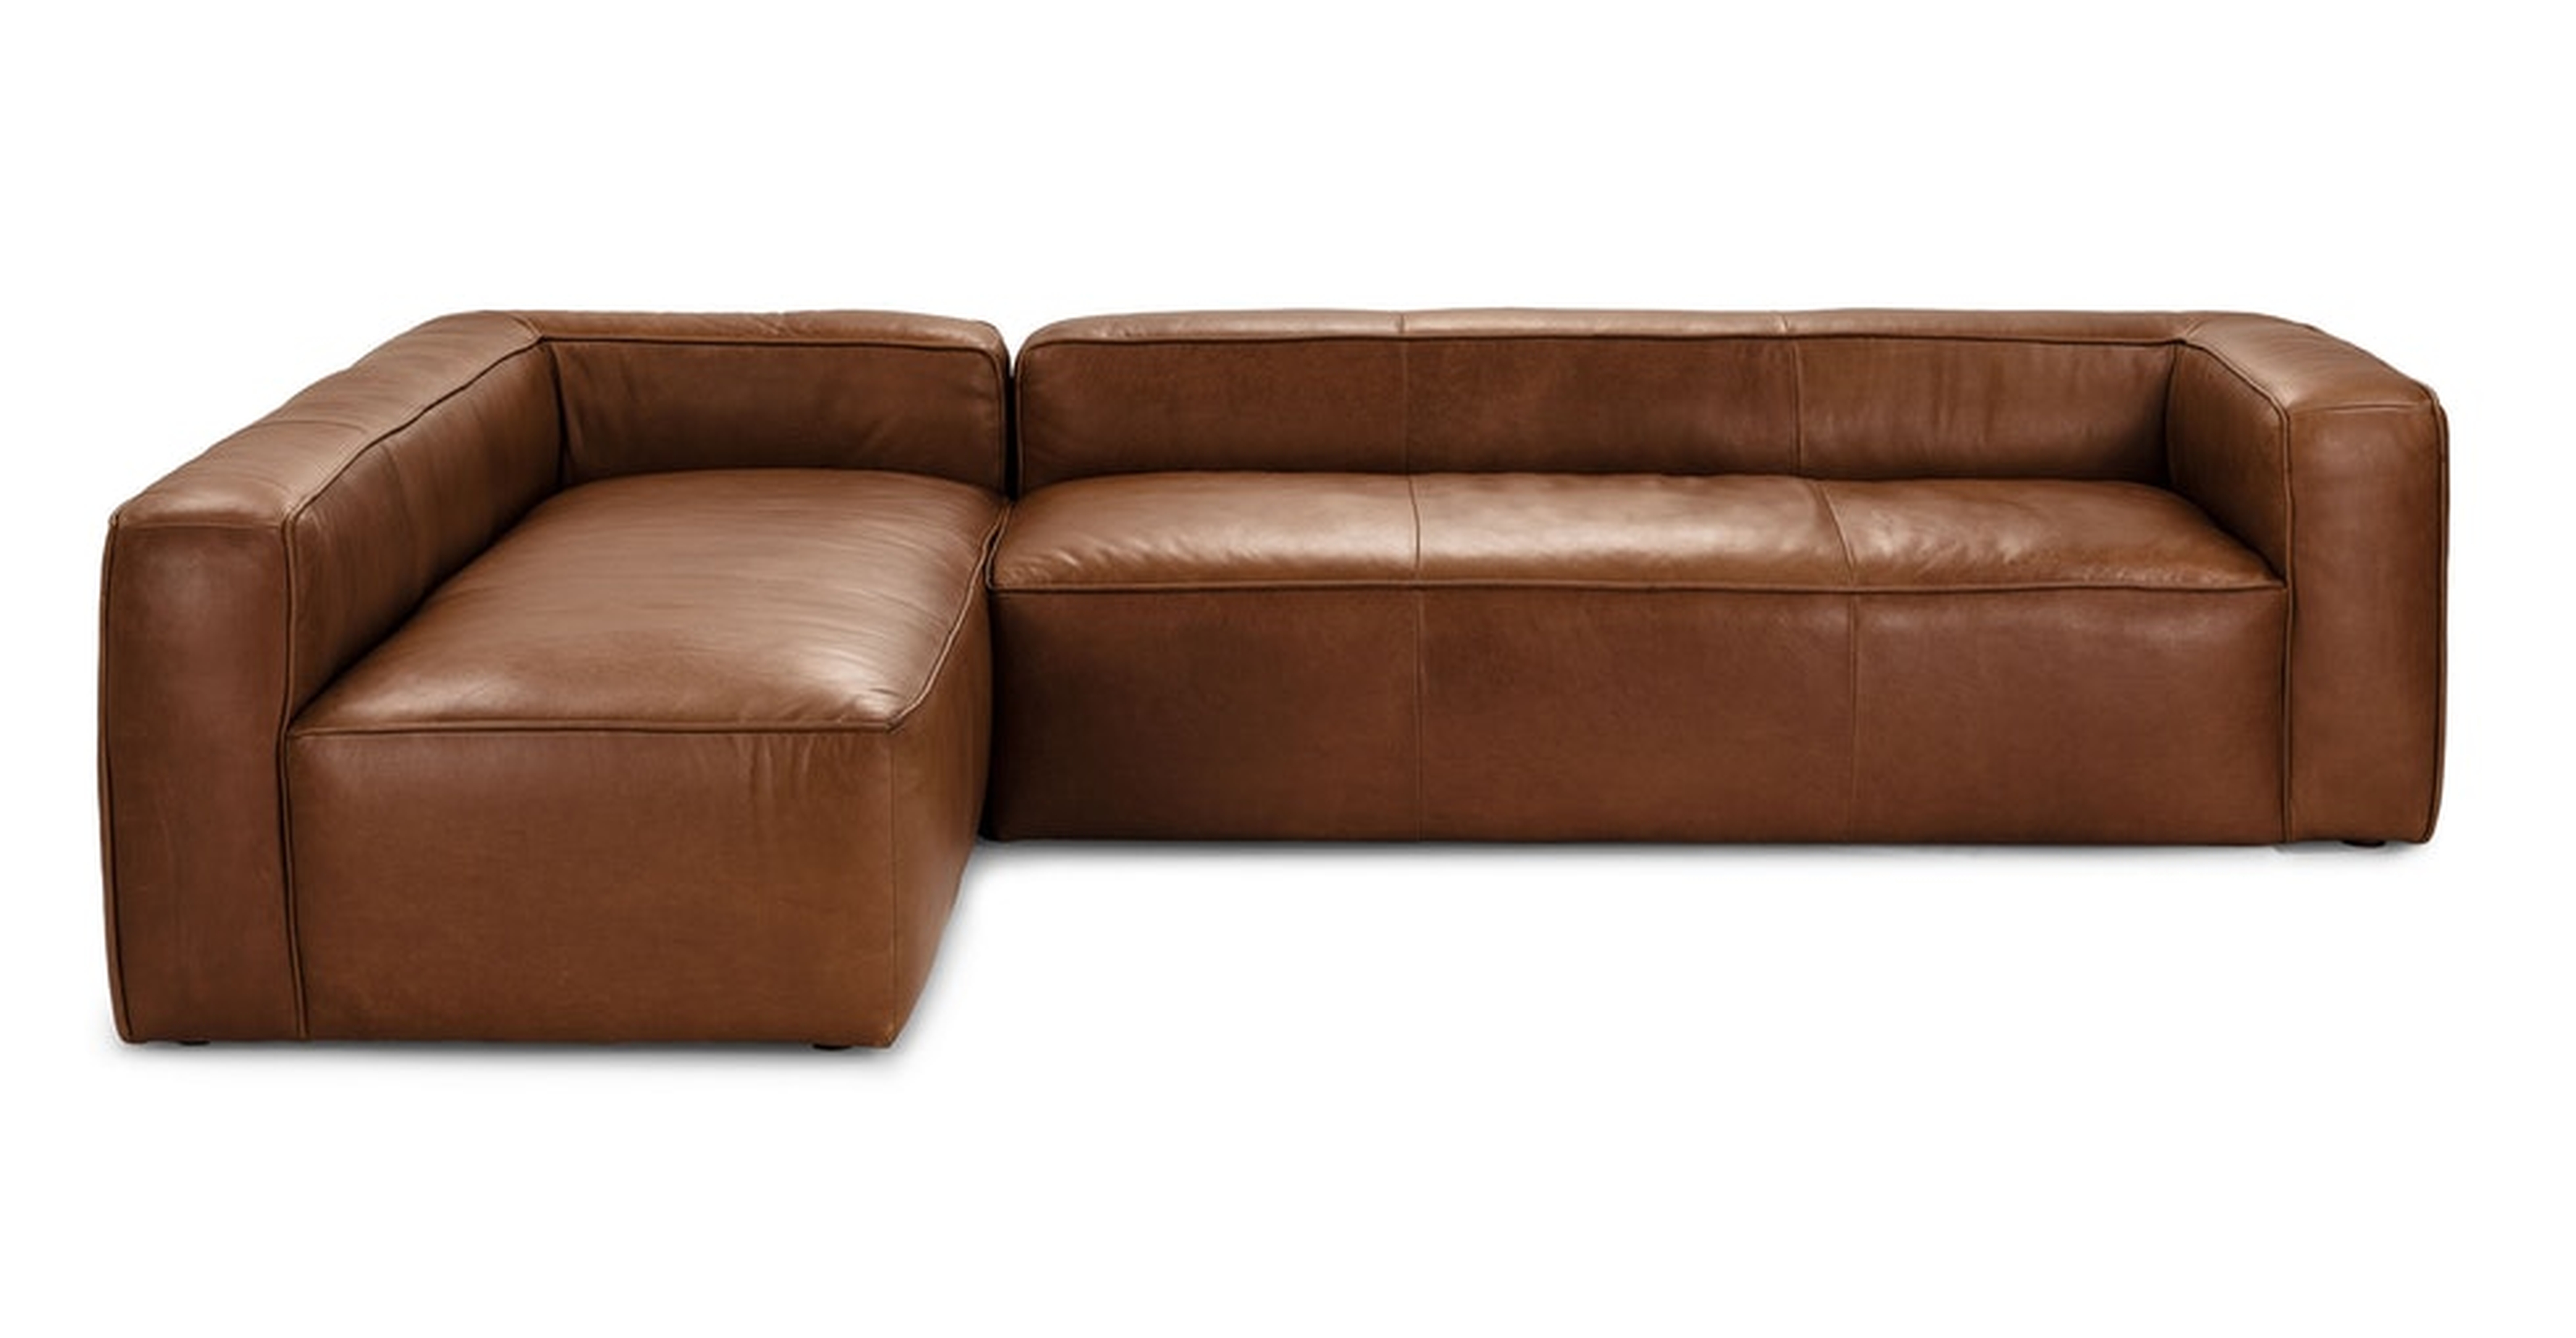 Mello Taos Brown Left Arm Corner Sectional - Article